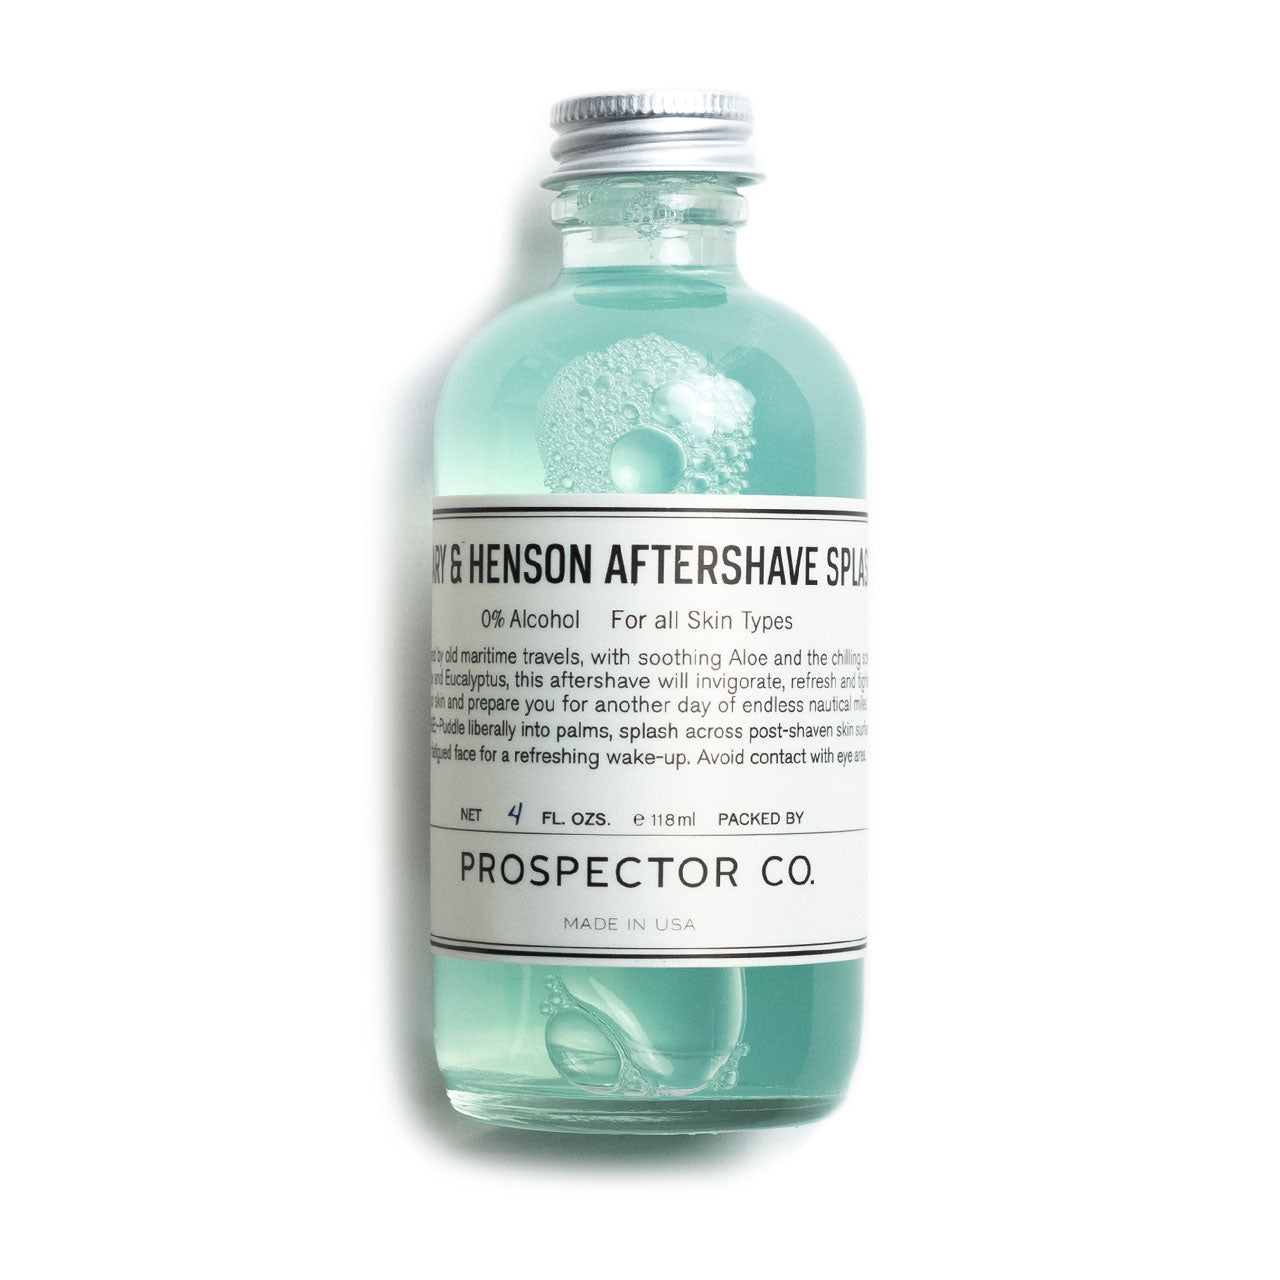 Prospector Co. Peary & Henson Aftershave